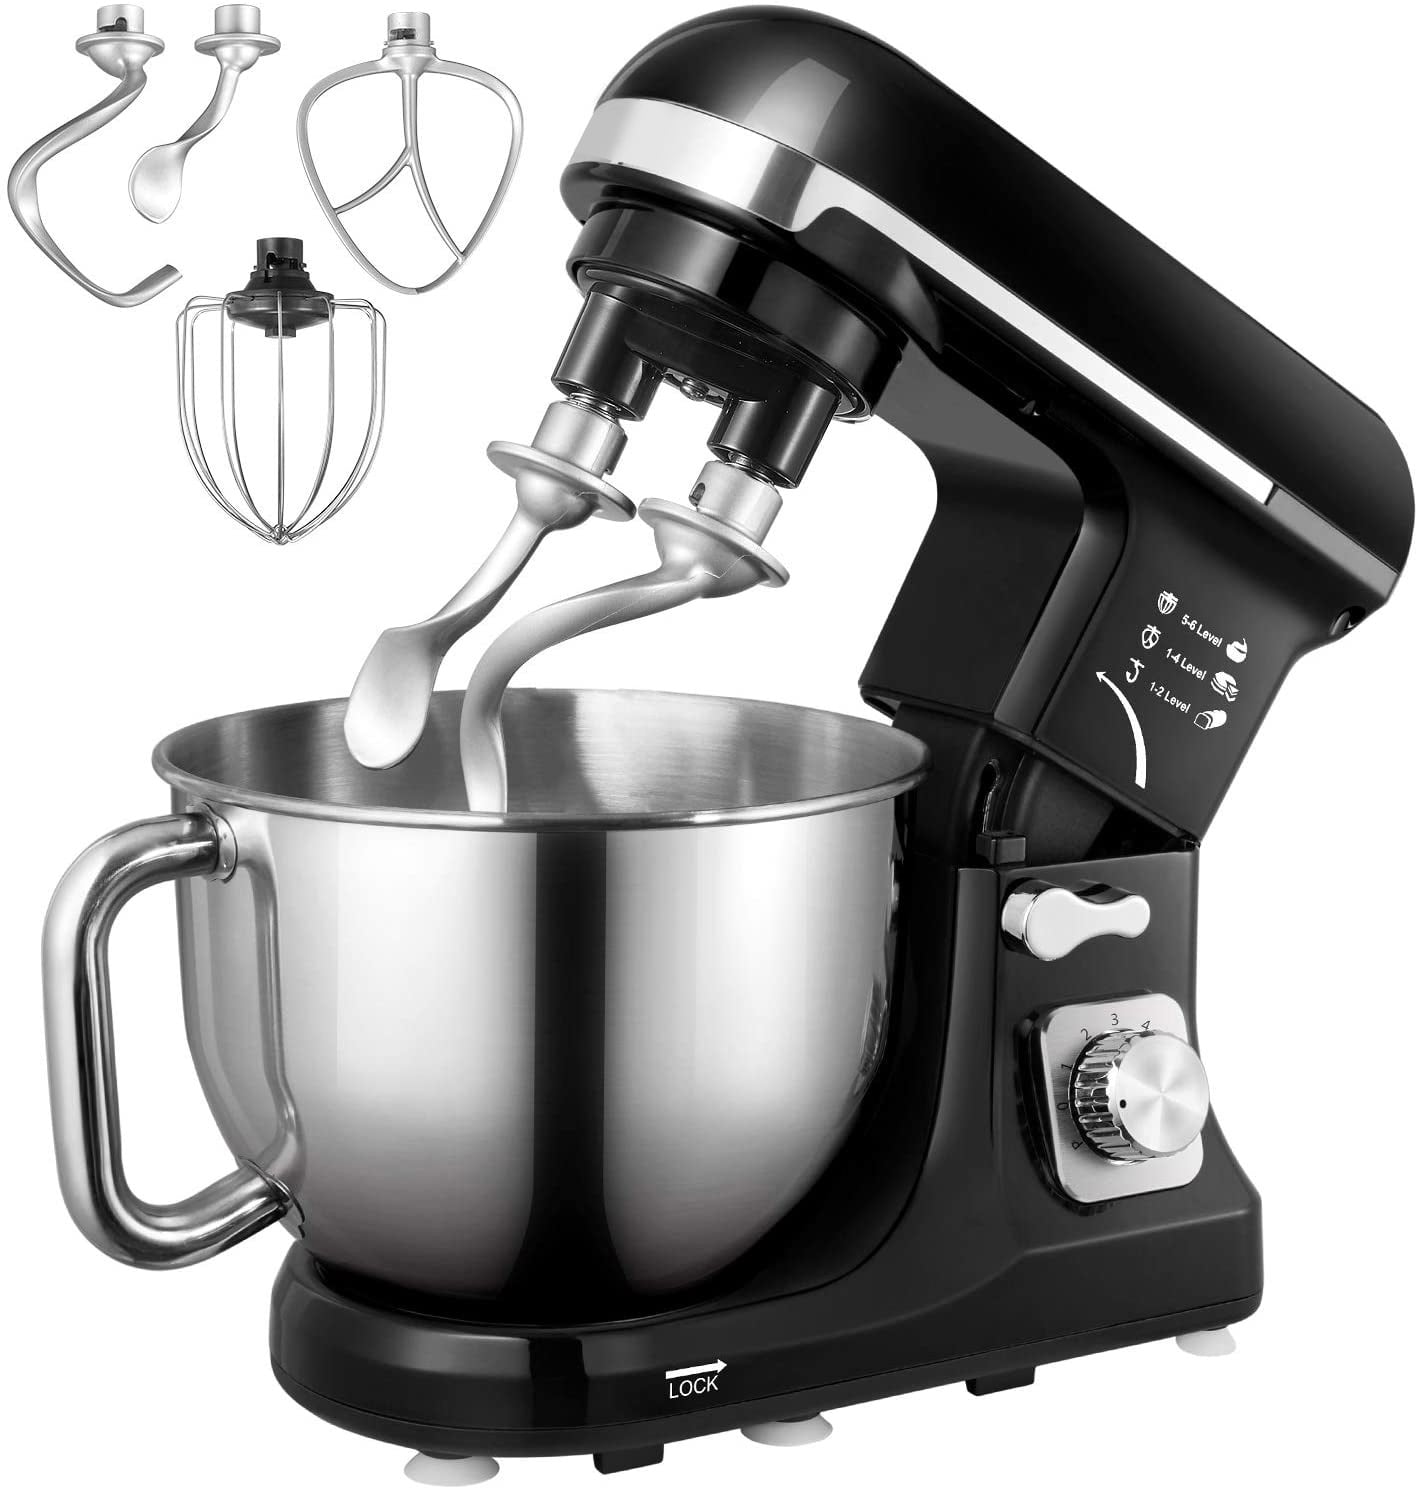 Bosch Universal Plus Stand Mixer - Black with Stainless Steel Bowl